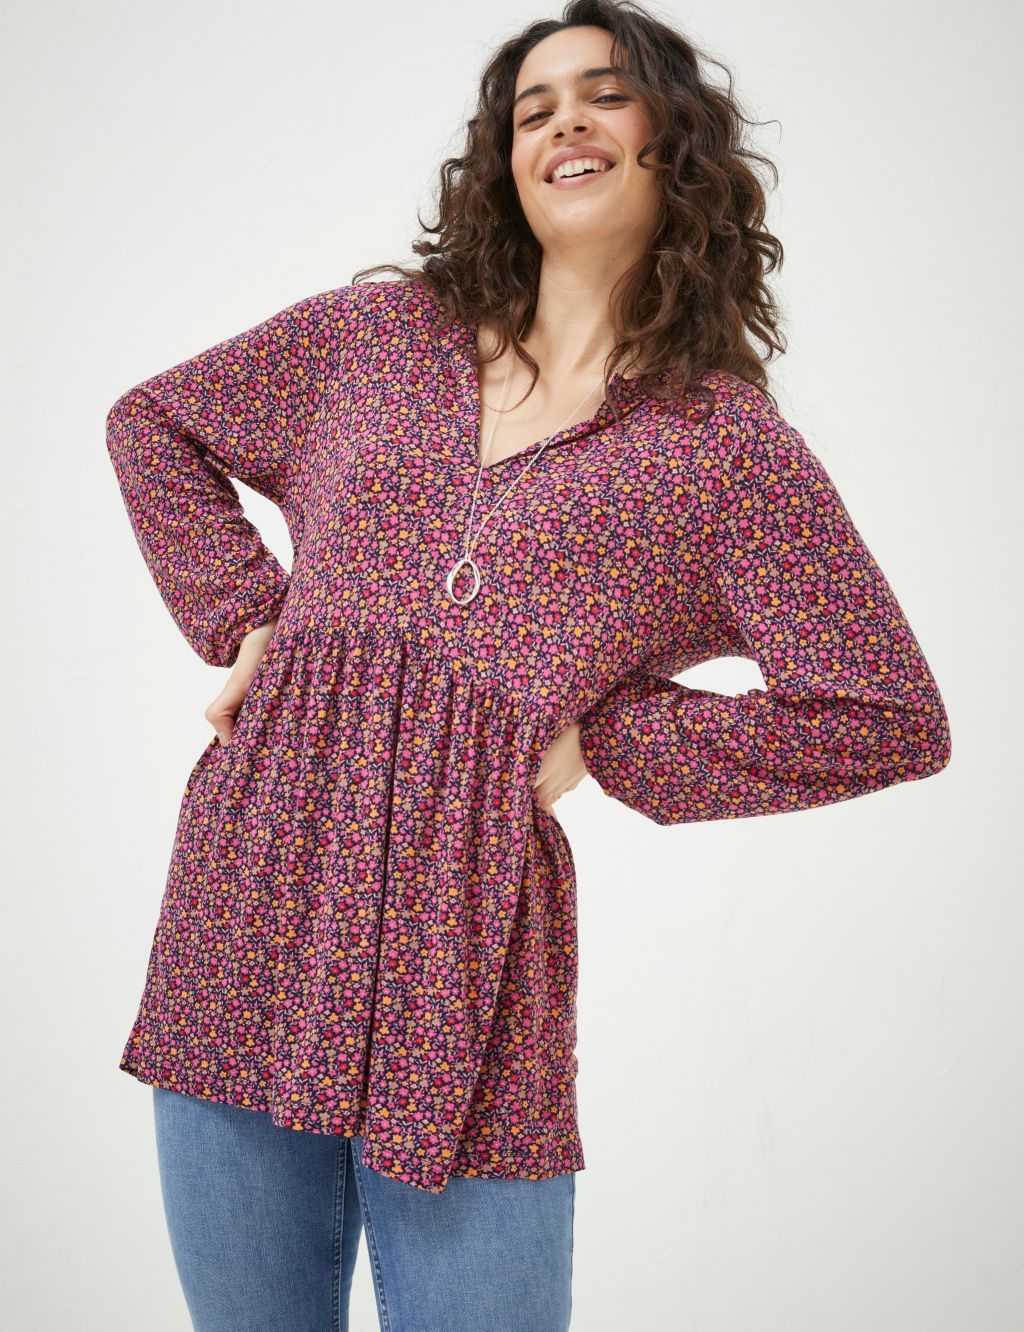 Ditsy Floral Tunic image 1